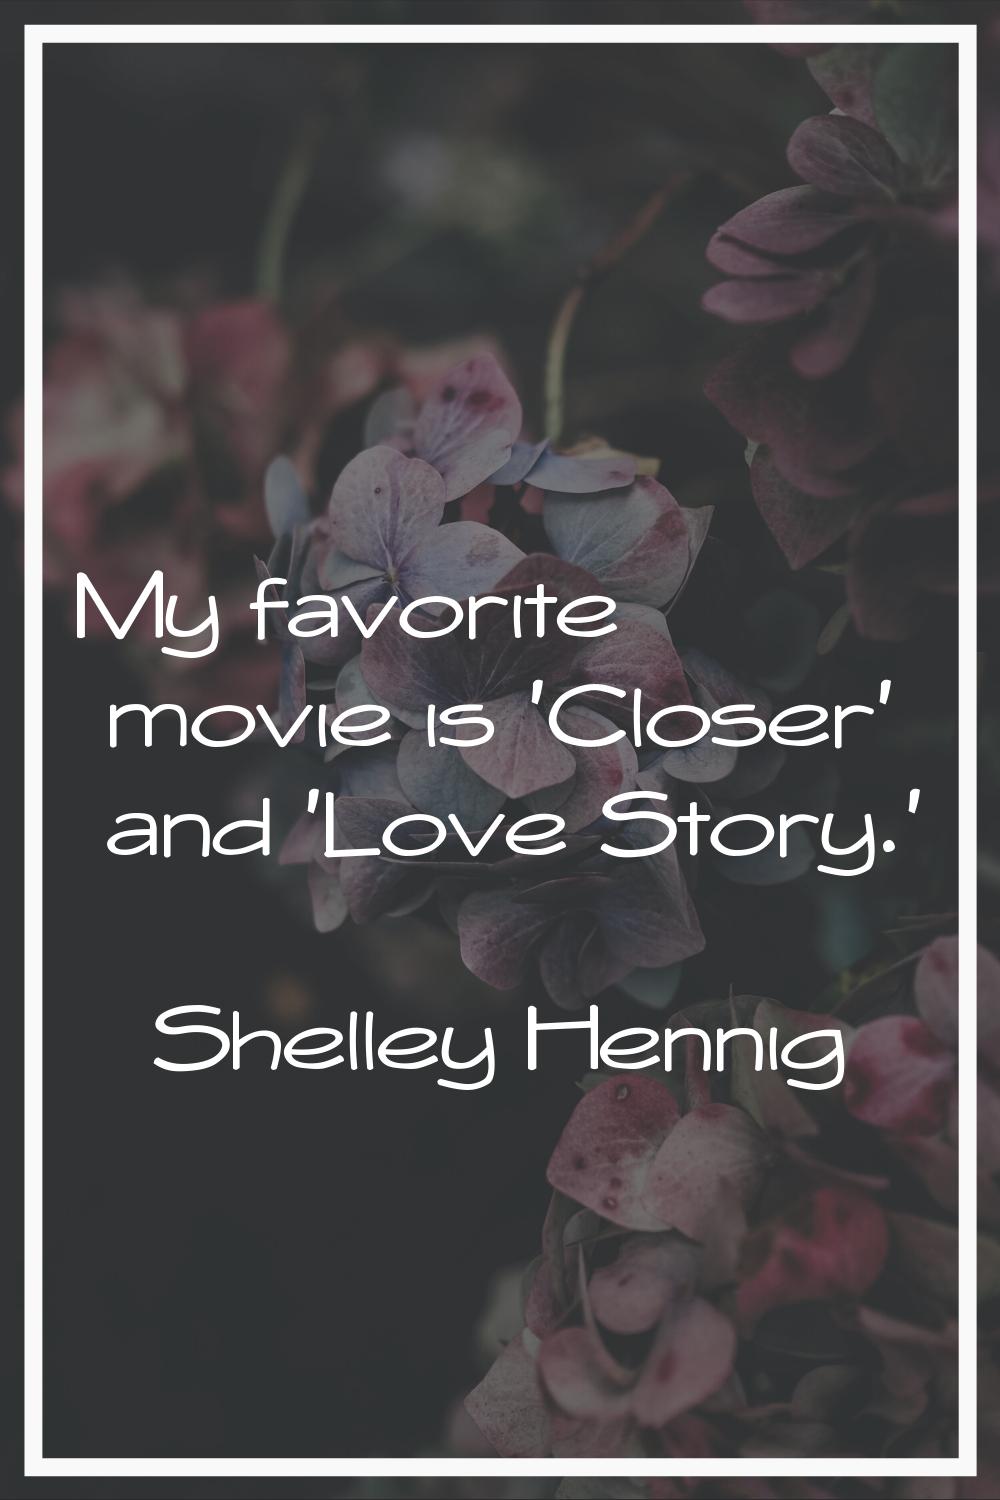 My favorite movie is 'Closer' and 'Love Story.'